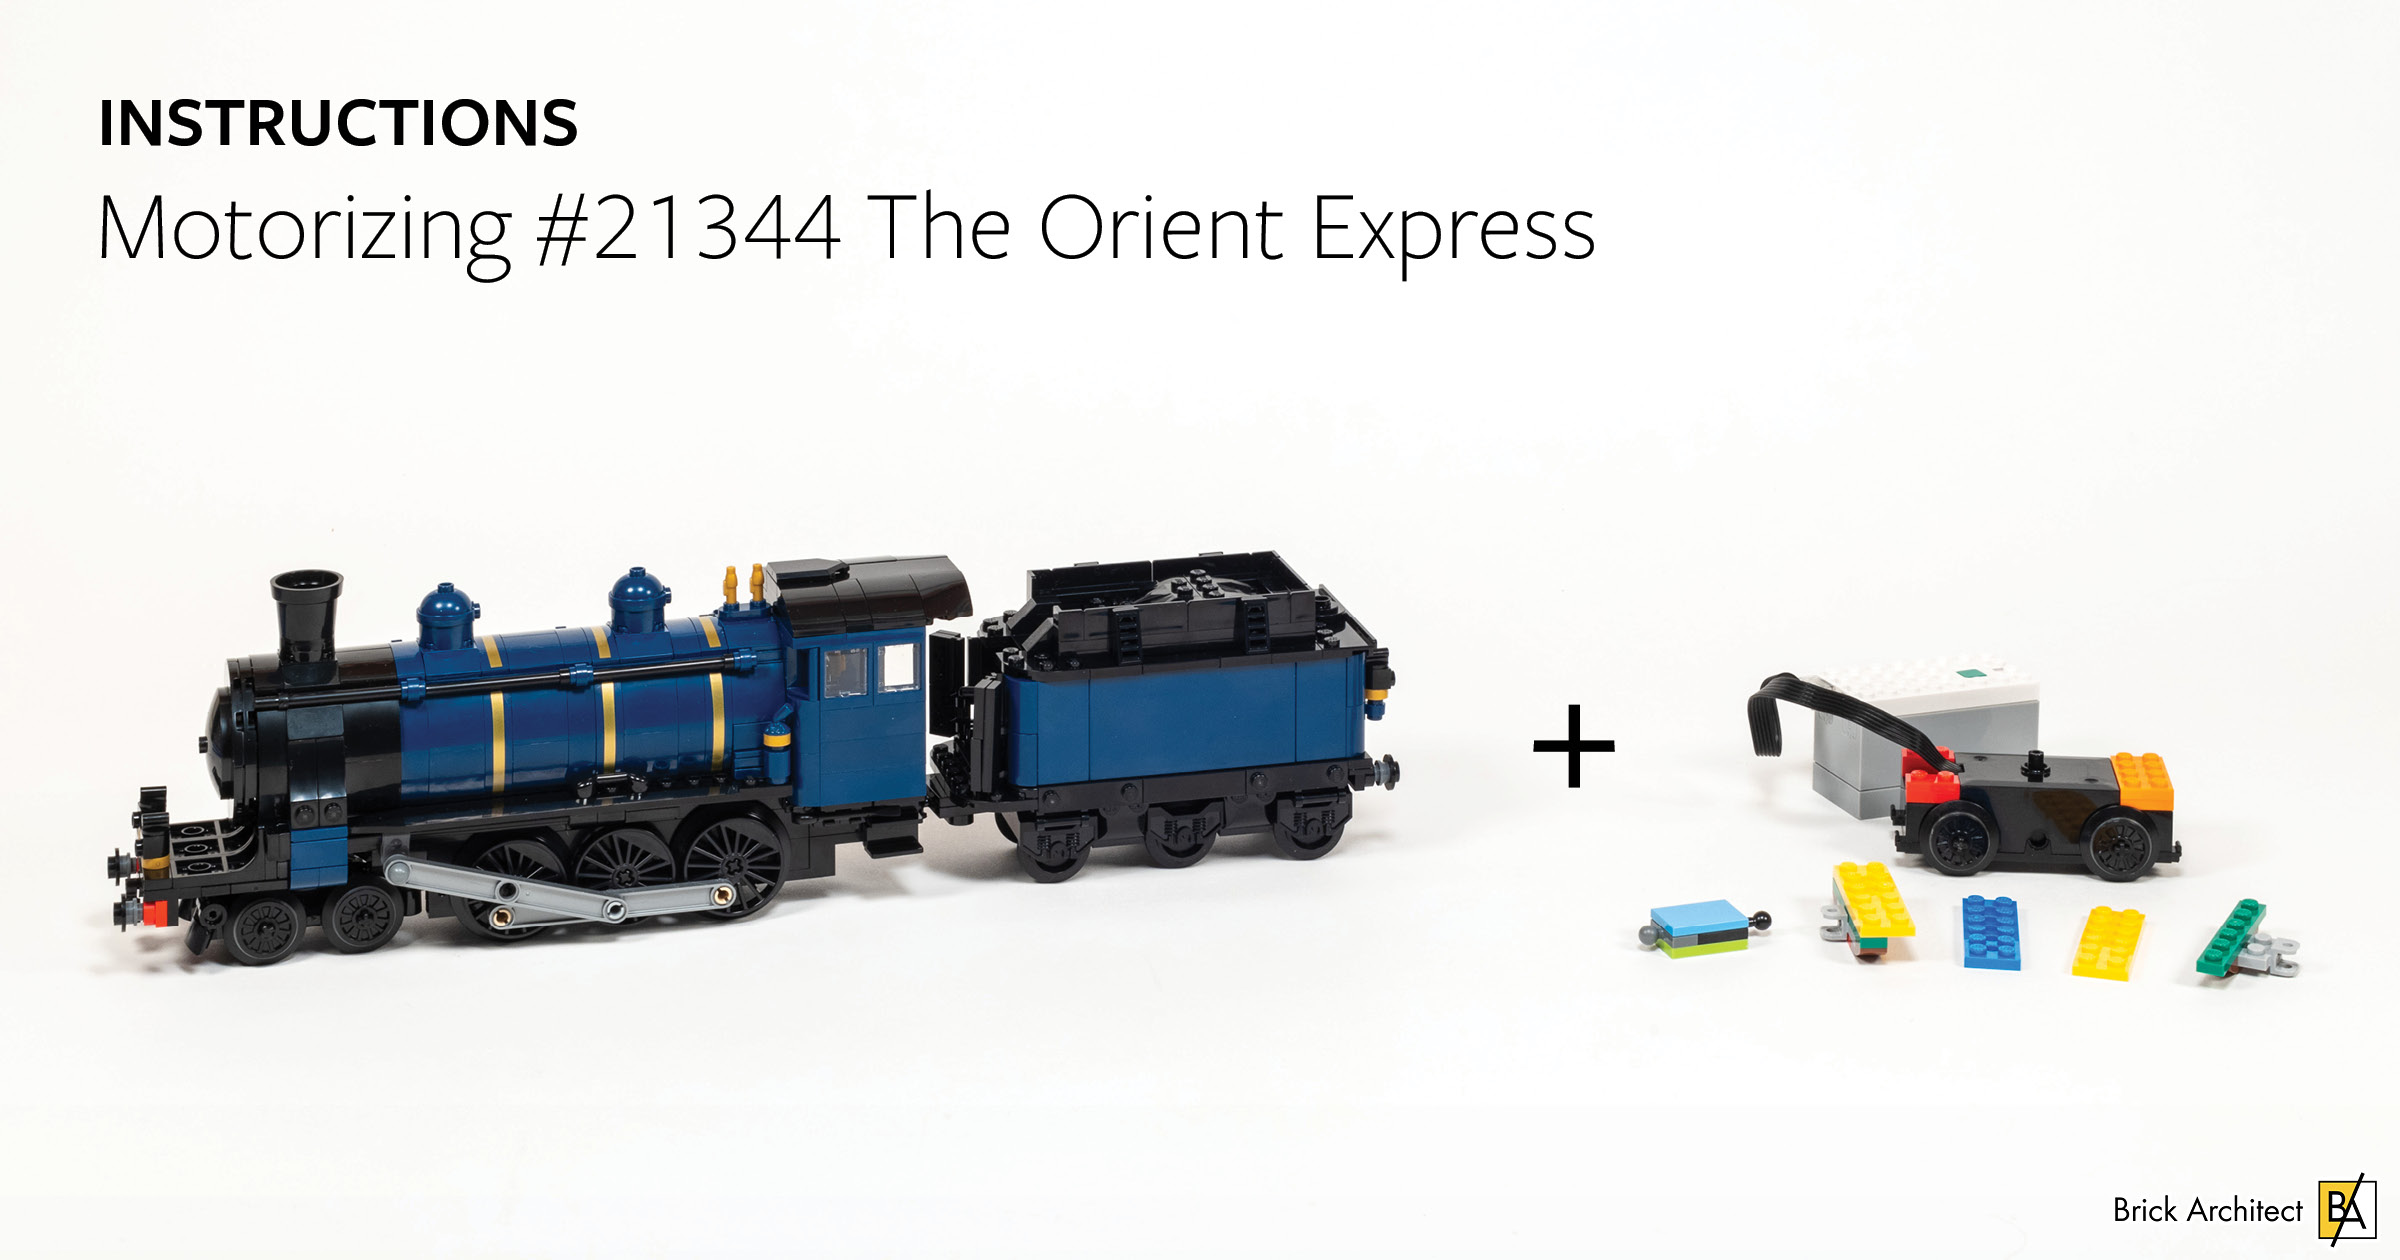 See how easy it is to add a motor to the excellent Orient Express train.